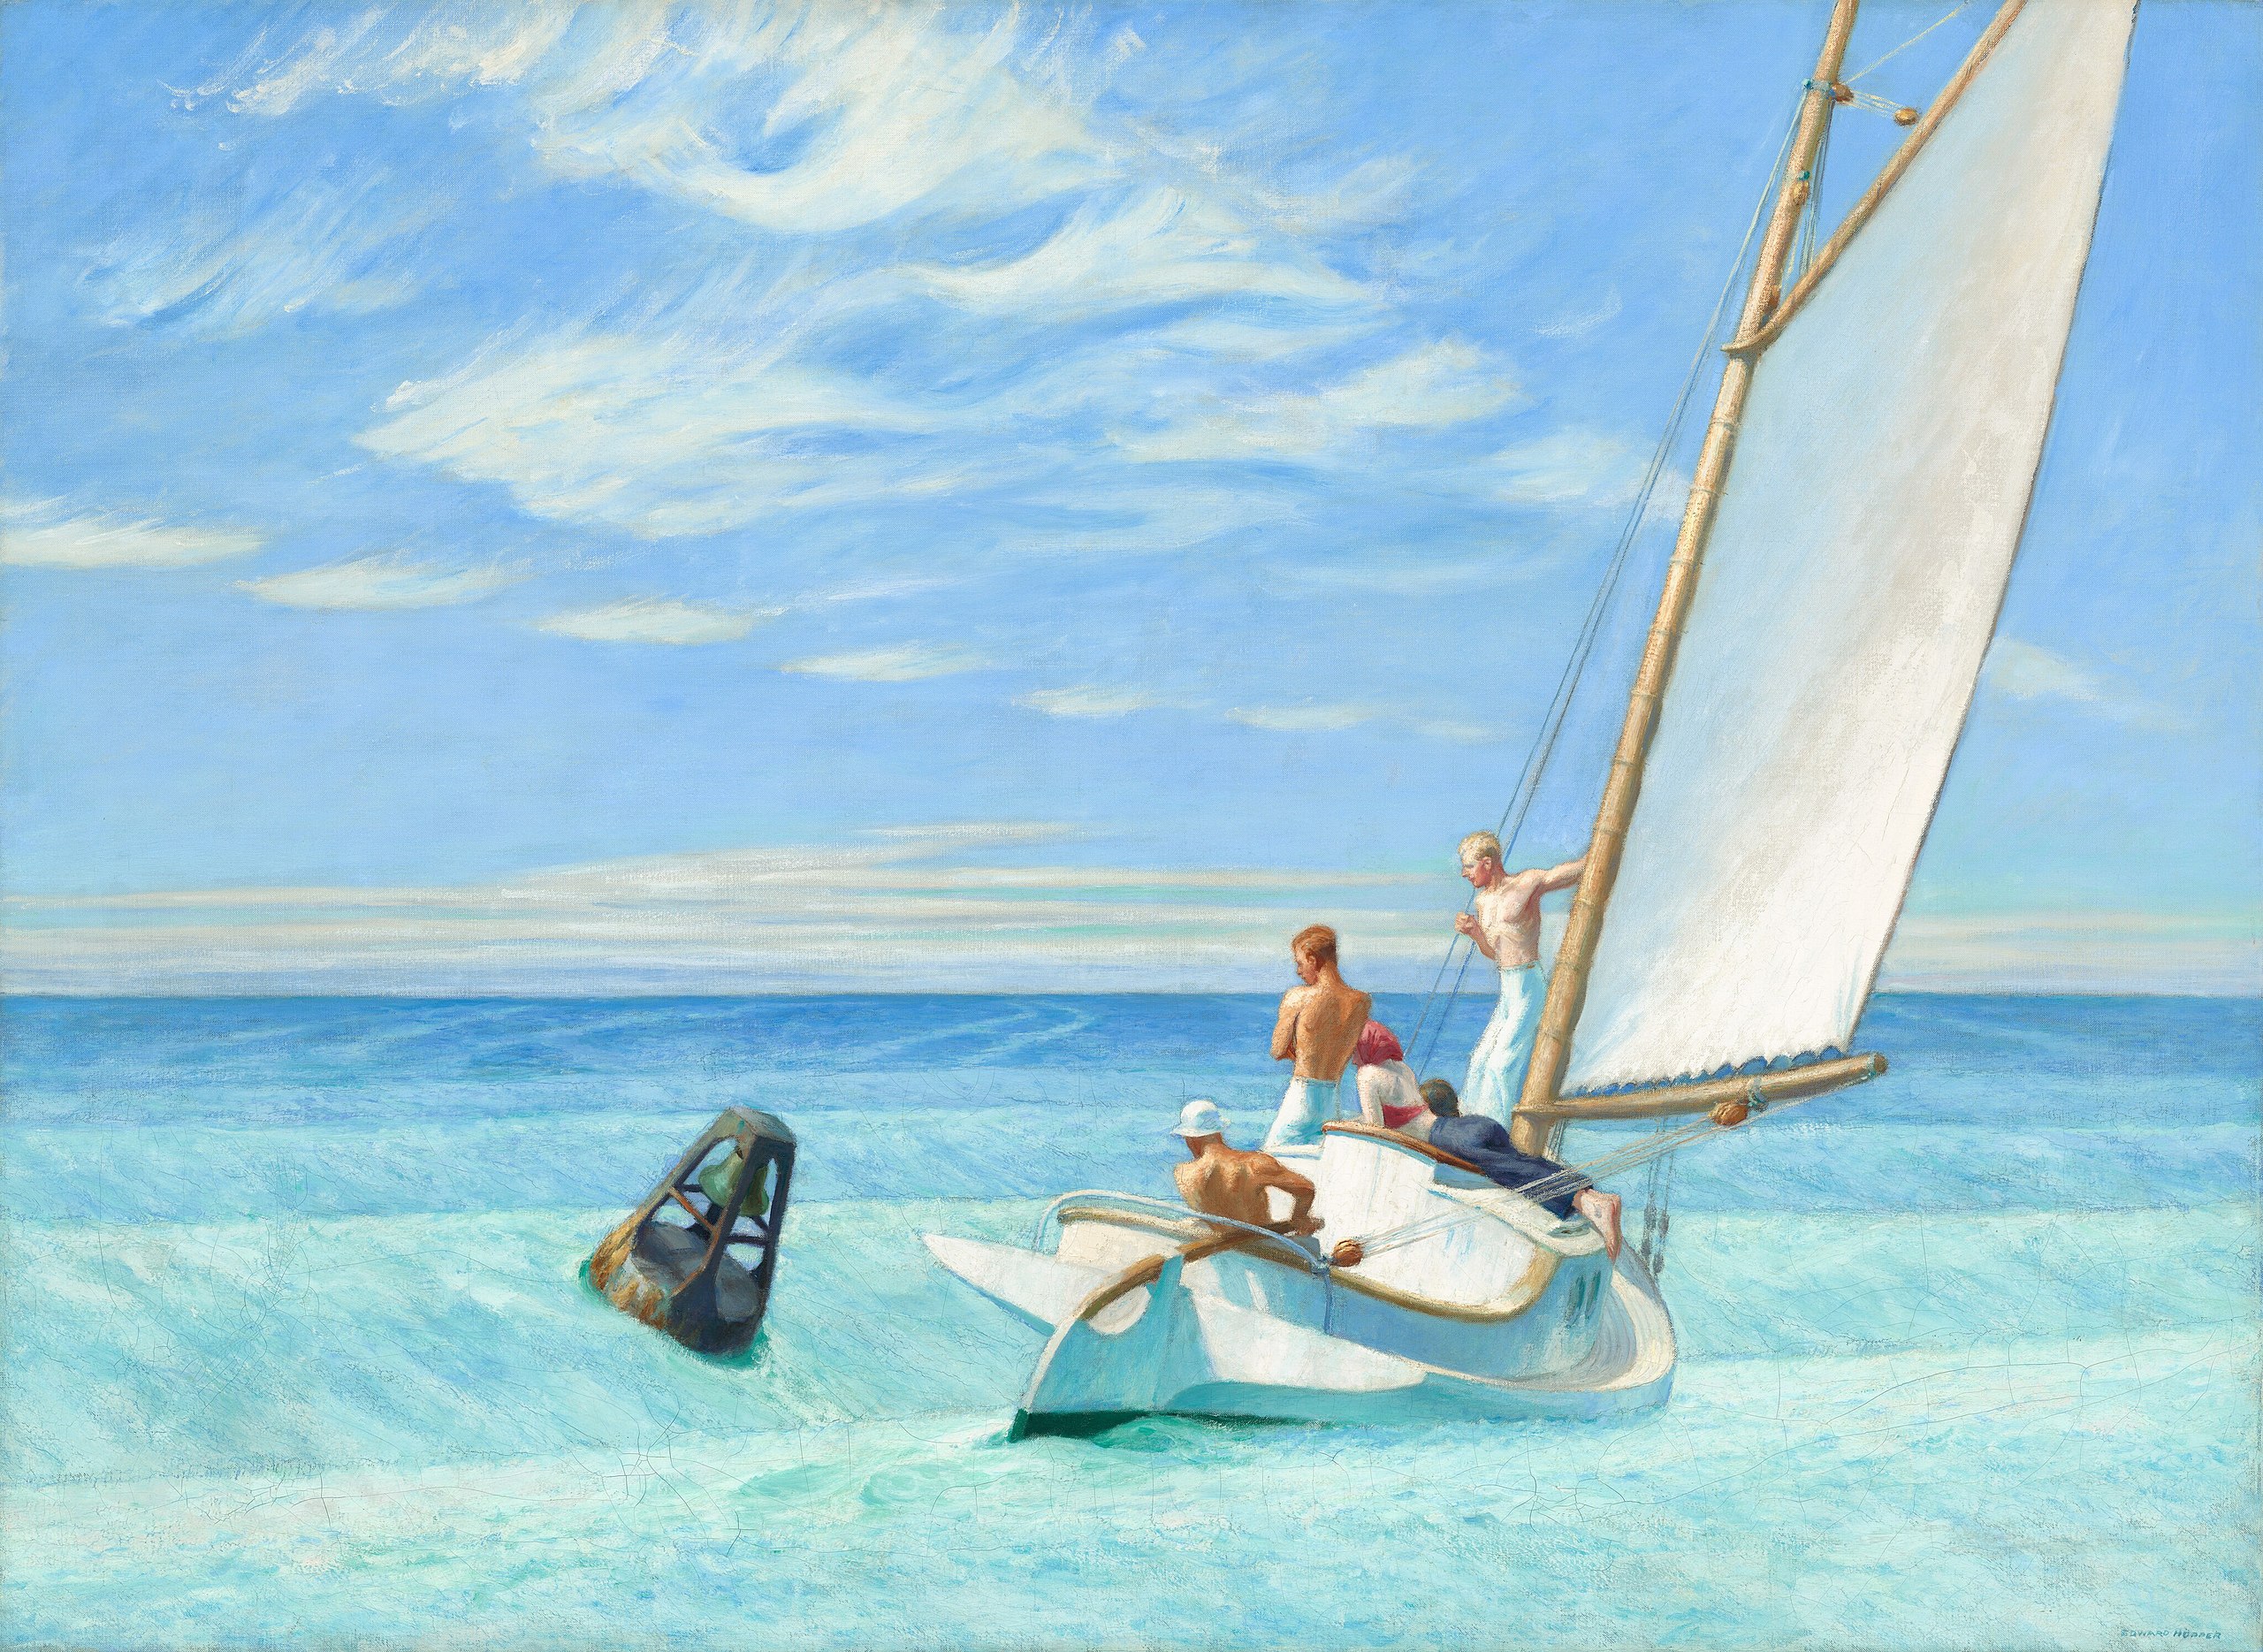 Ground Swell by Edward Hopper - 1939 - 91.92 × 127.16 cm National Gallery of Art